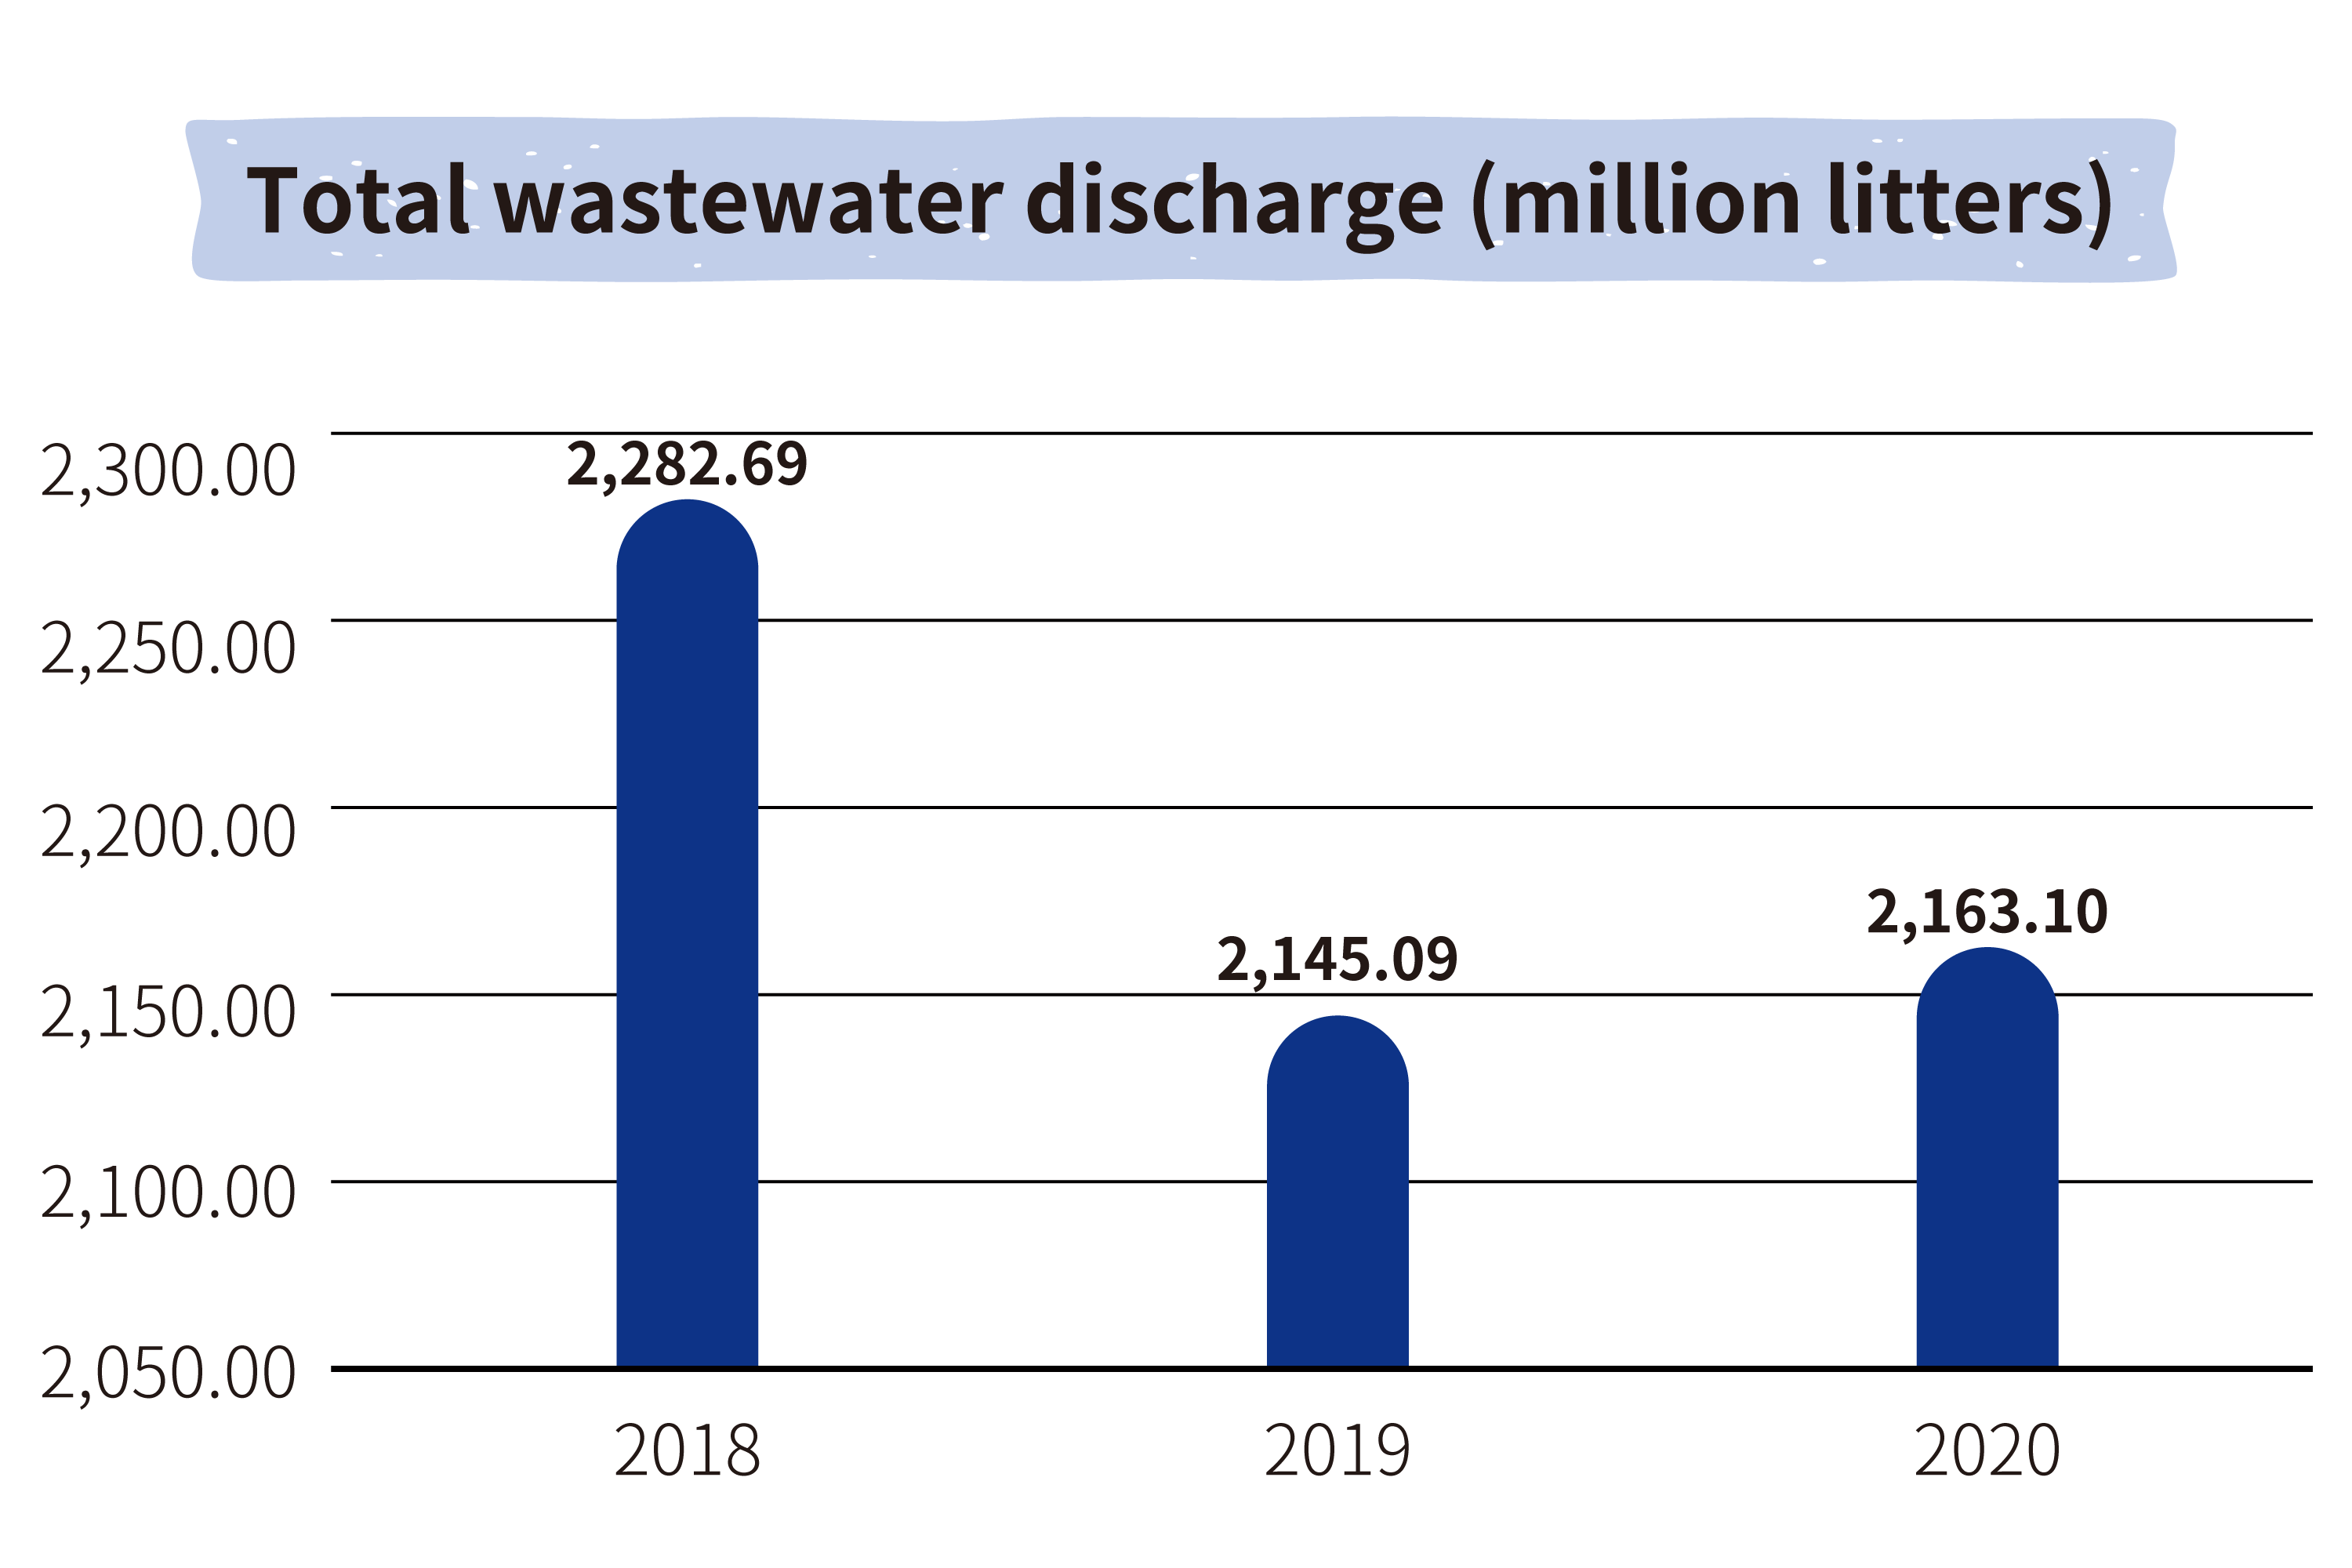 Wastewater discharge over the past 3 years